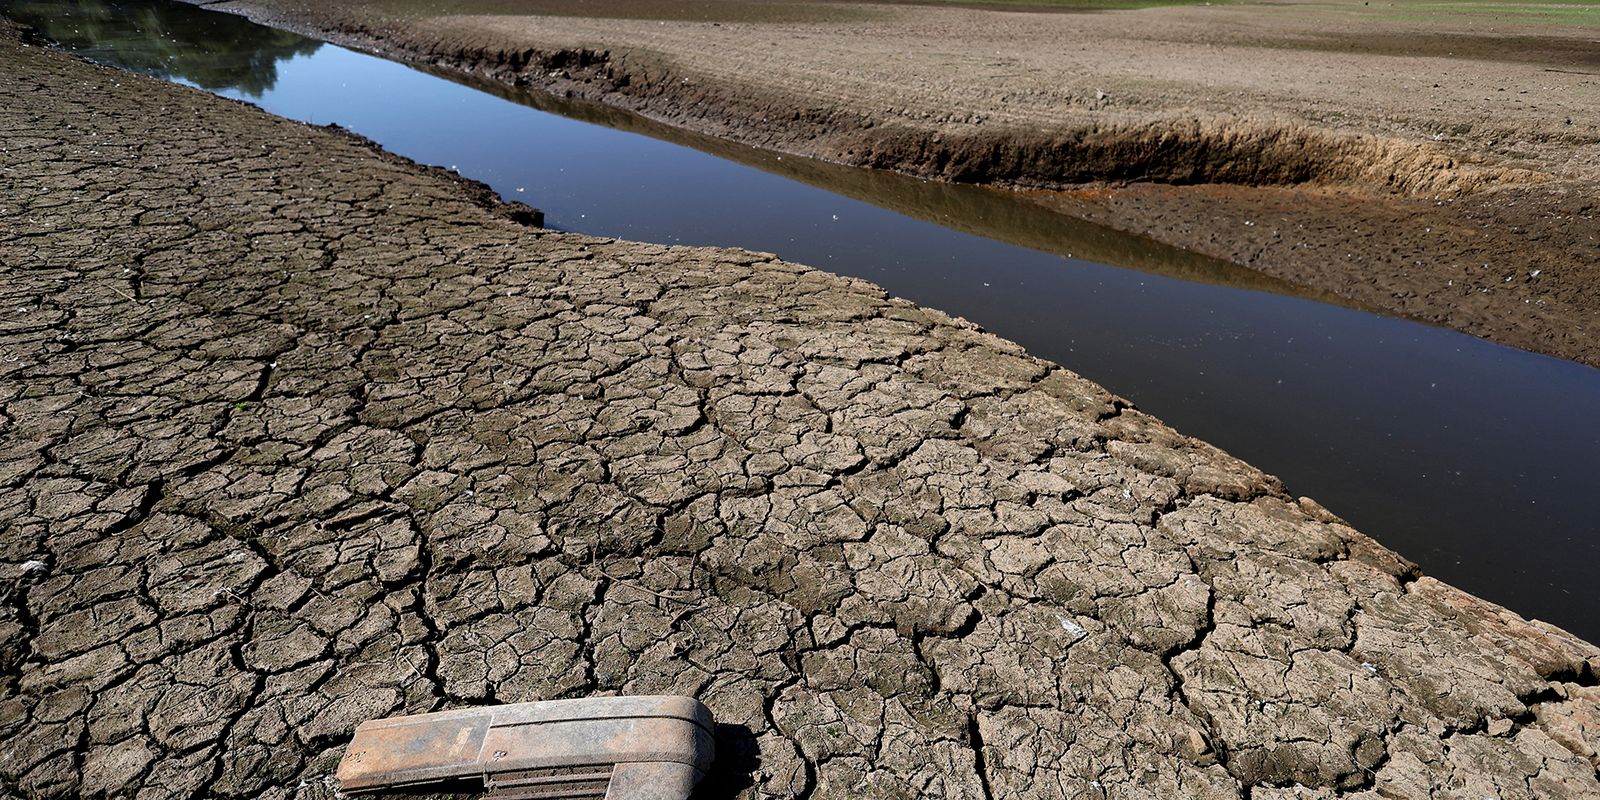 The United Kingdom declares drought in parts of England during a heat wave